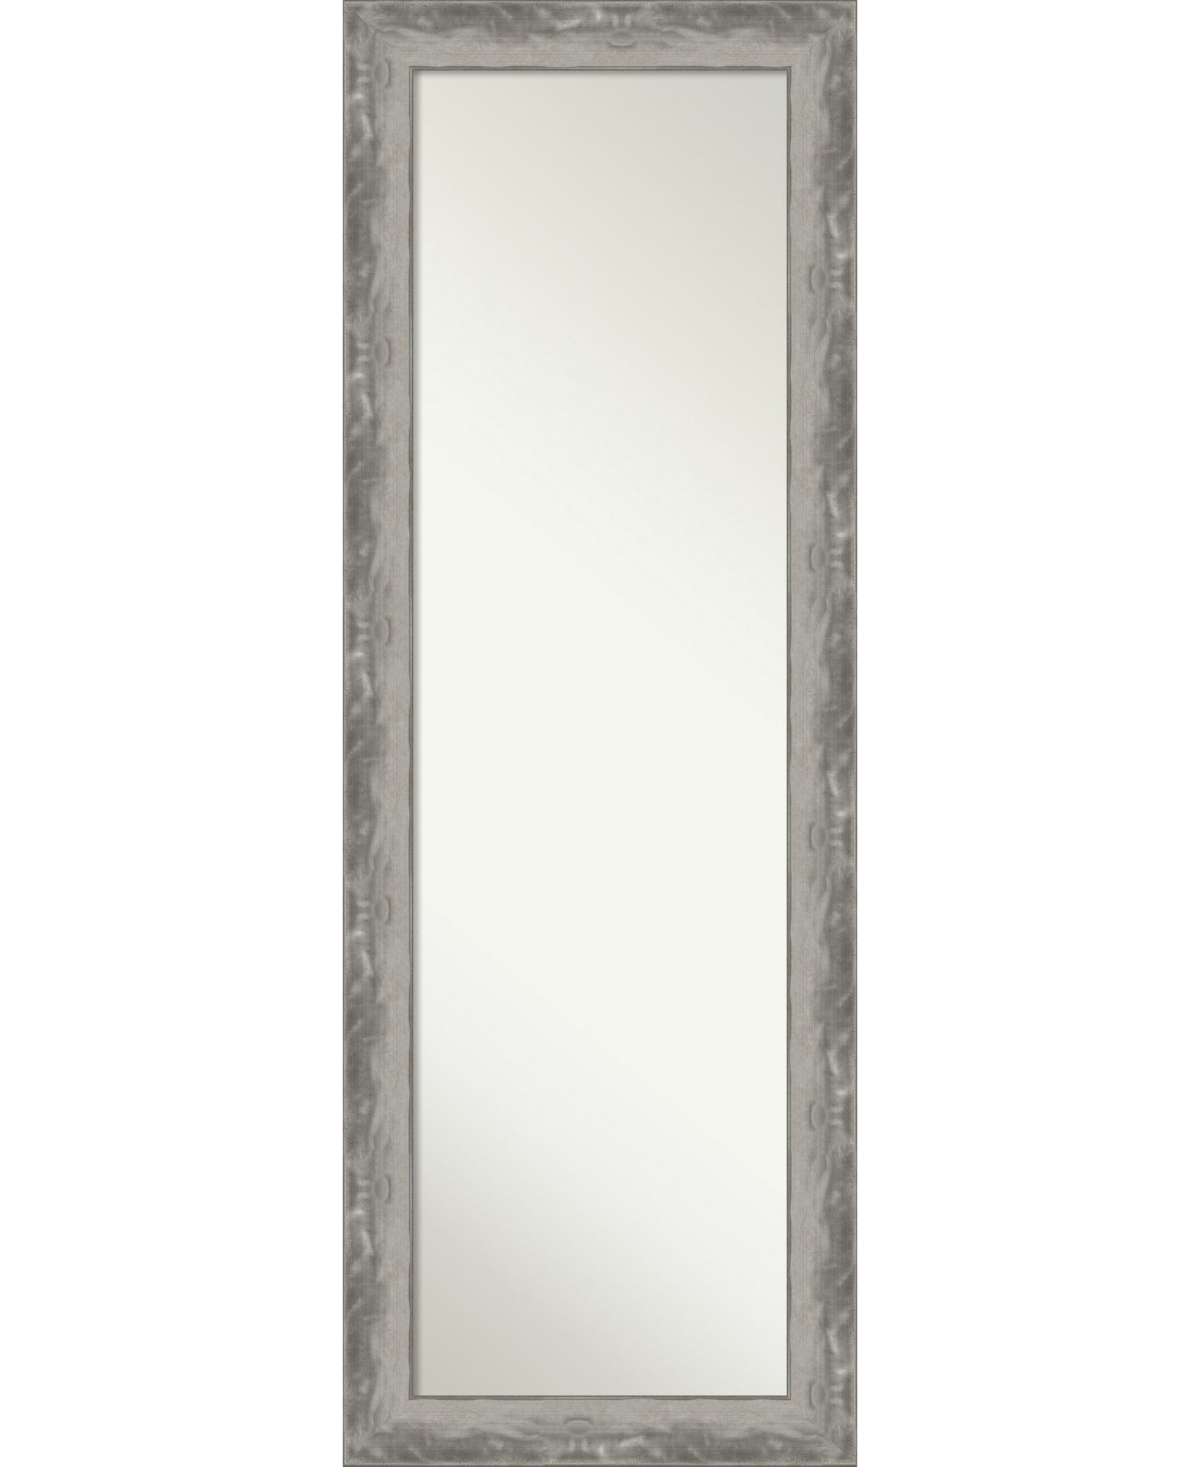 Waveline Silver-tone on The Door Full Length Mirror, 18.38" x 52.38" - Silver